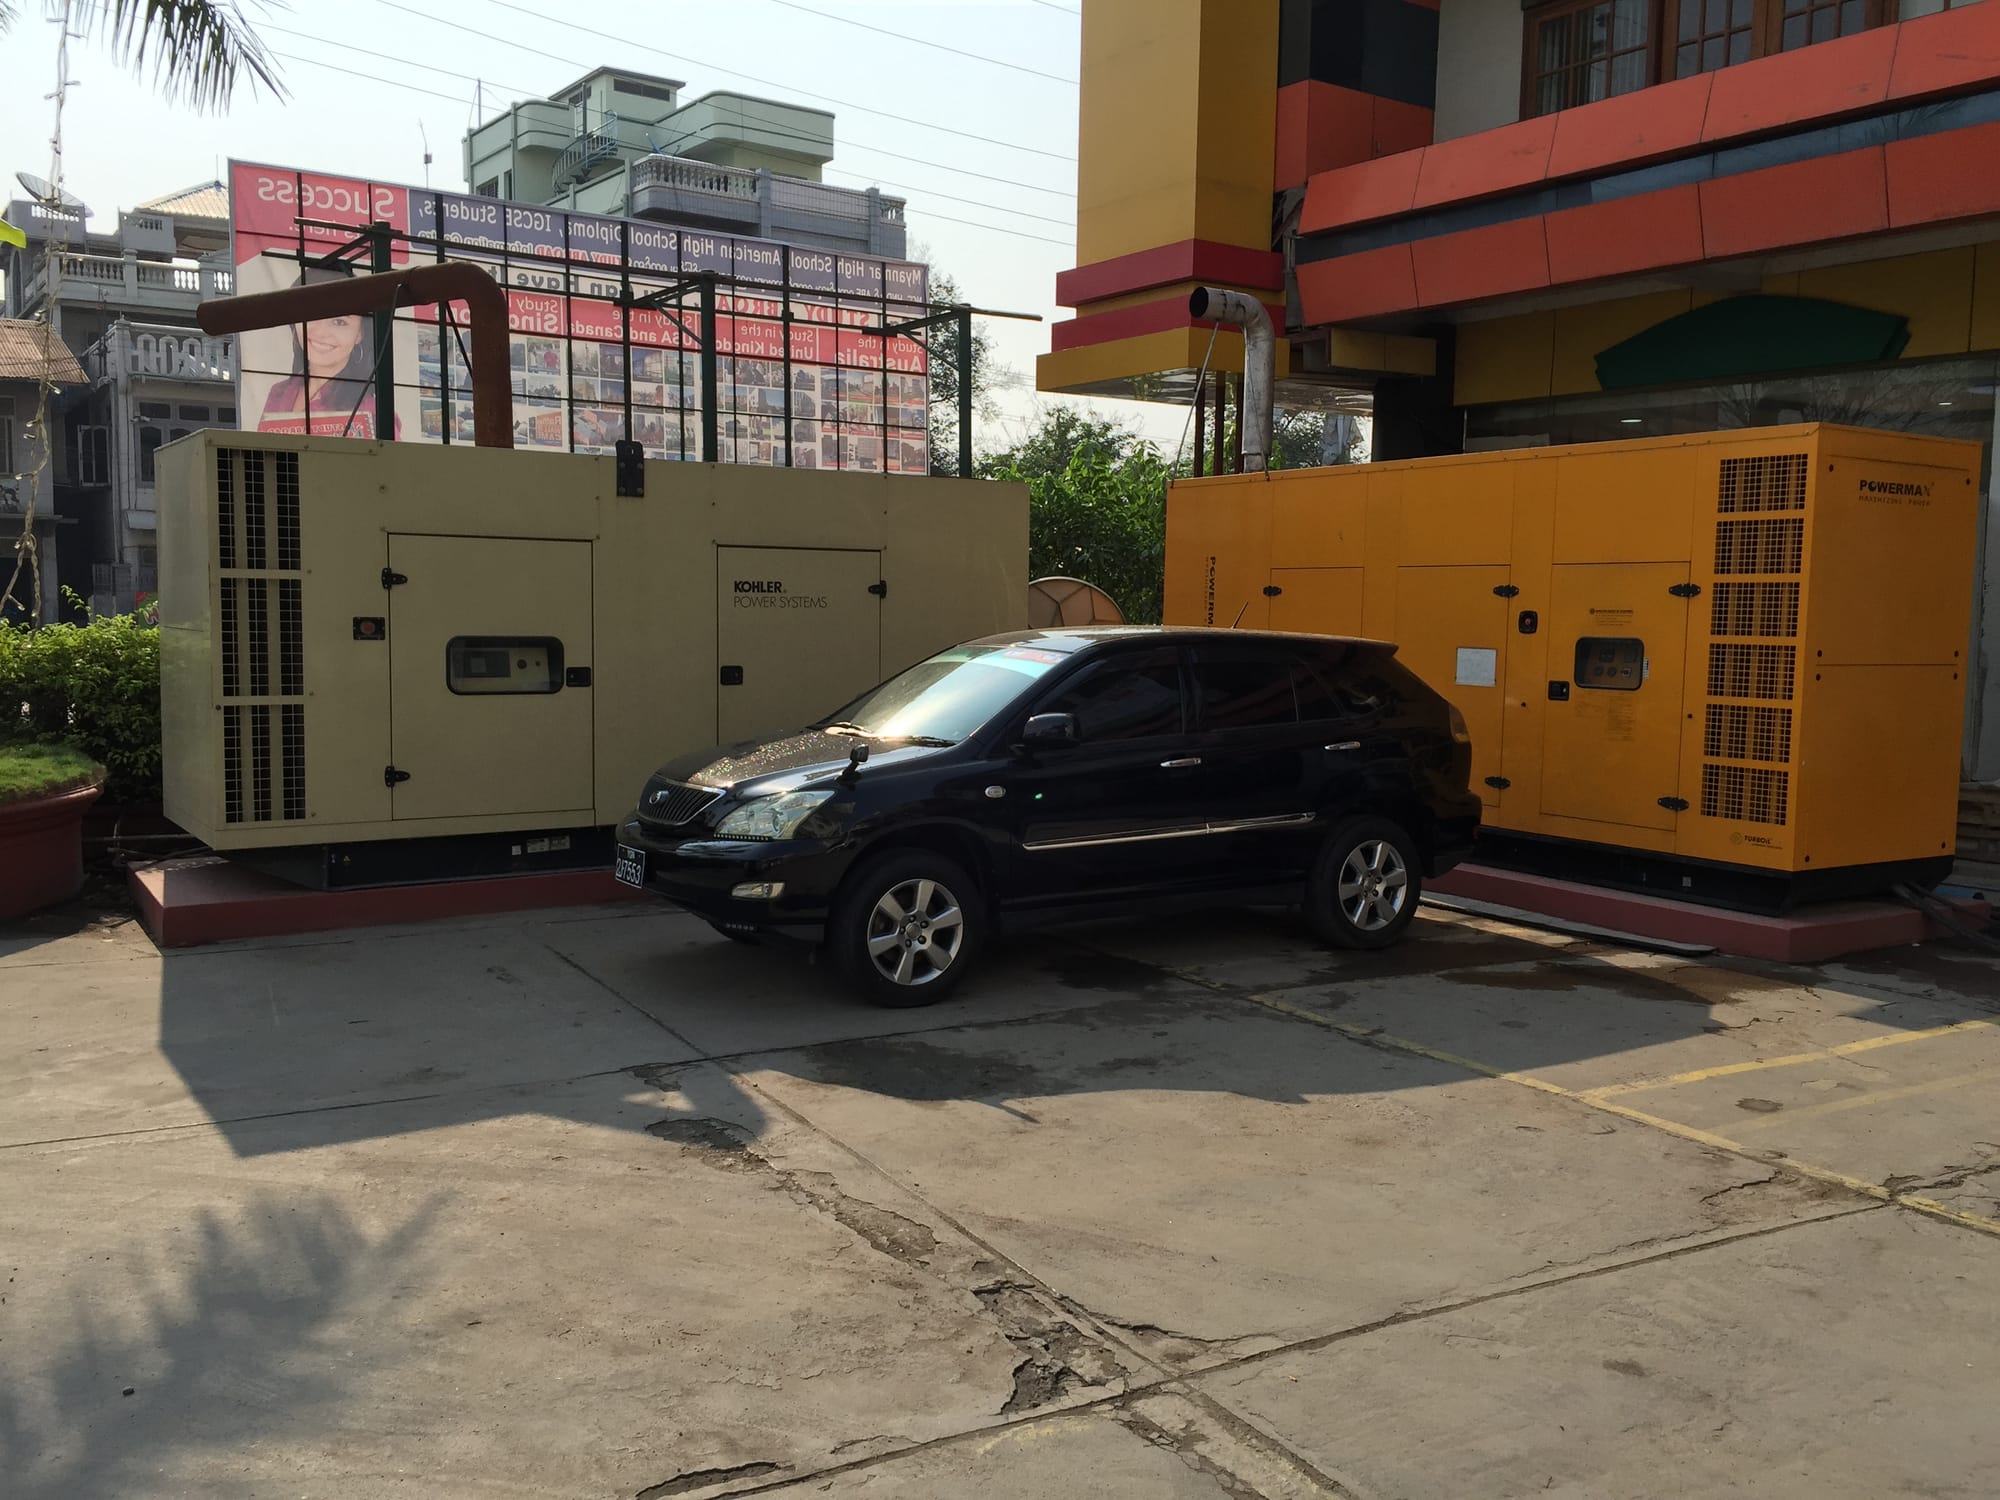 Photo by Author — electricity generators at Hotel Mandalay